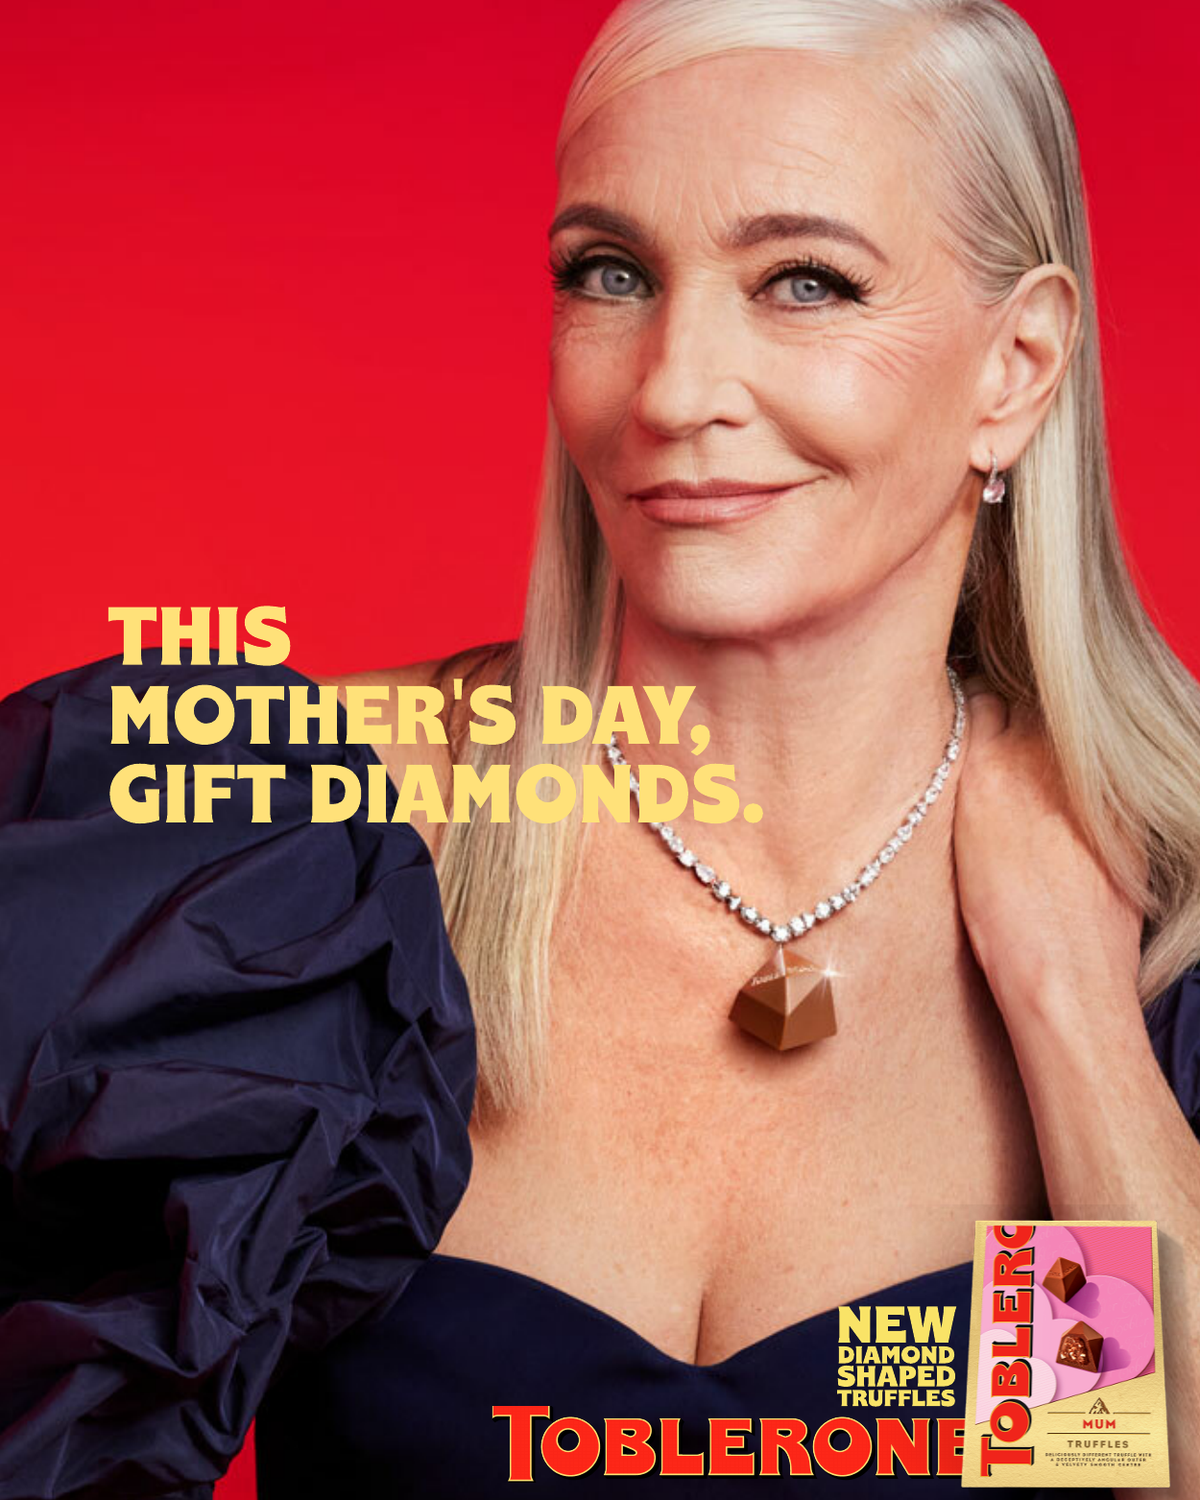 THIS MOTHER'S DAY, GIFT DIAMONDS